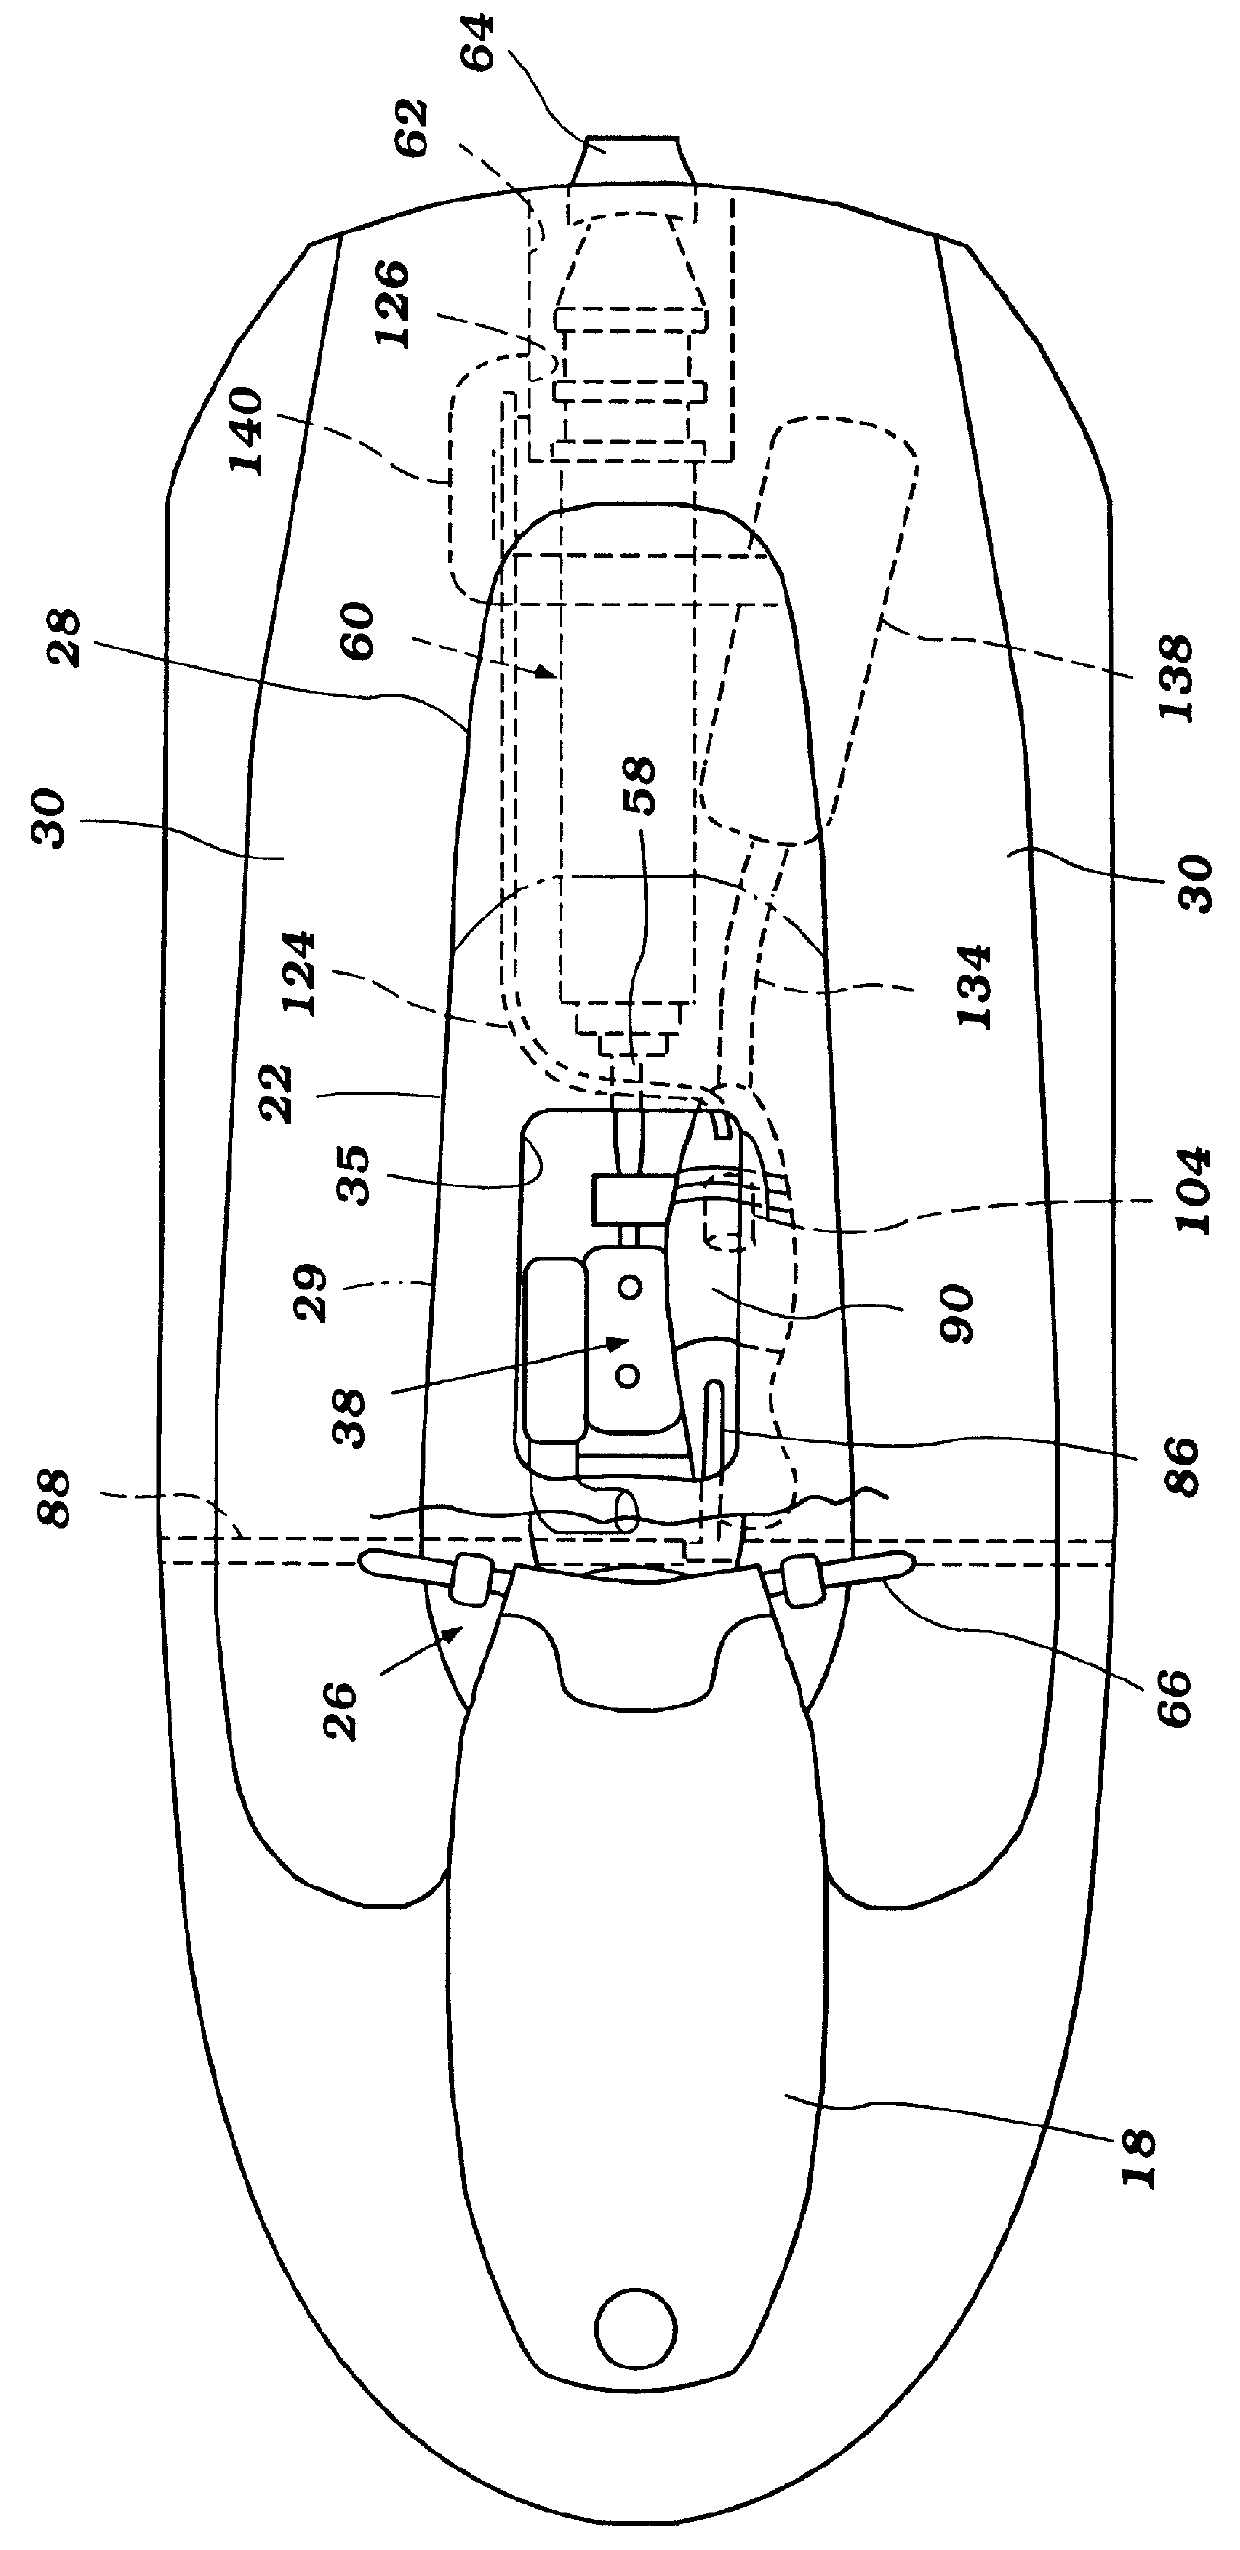 Catalytic exhaust system for watercraft